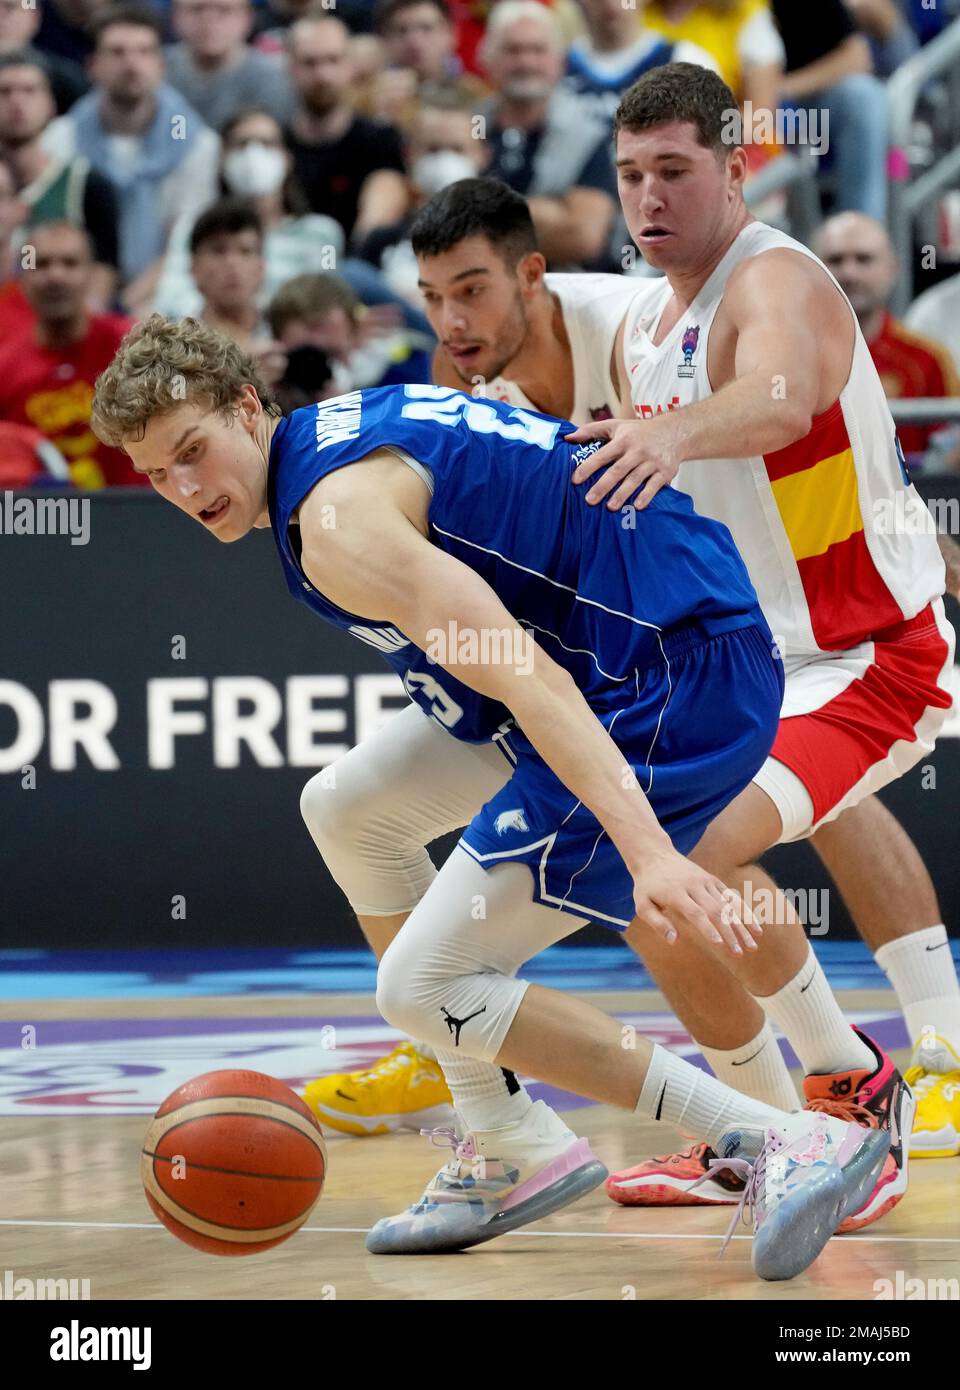 Finlands Luri Markkanen, left, is challenged by Spains Joel Parra Lopez, right, during the Eurobasket quarterfinal basketball match between Spain and Finland in Berlin, Germany, Tuesday, Sept